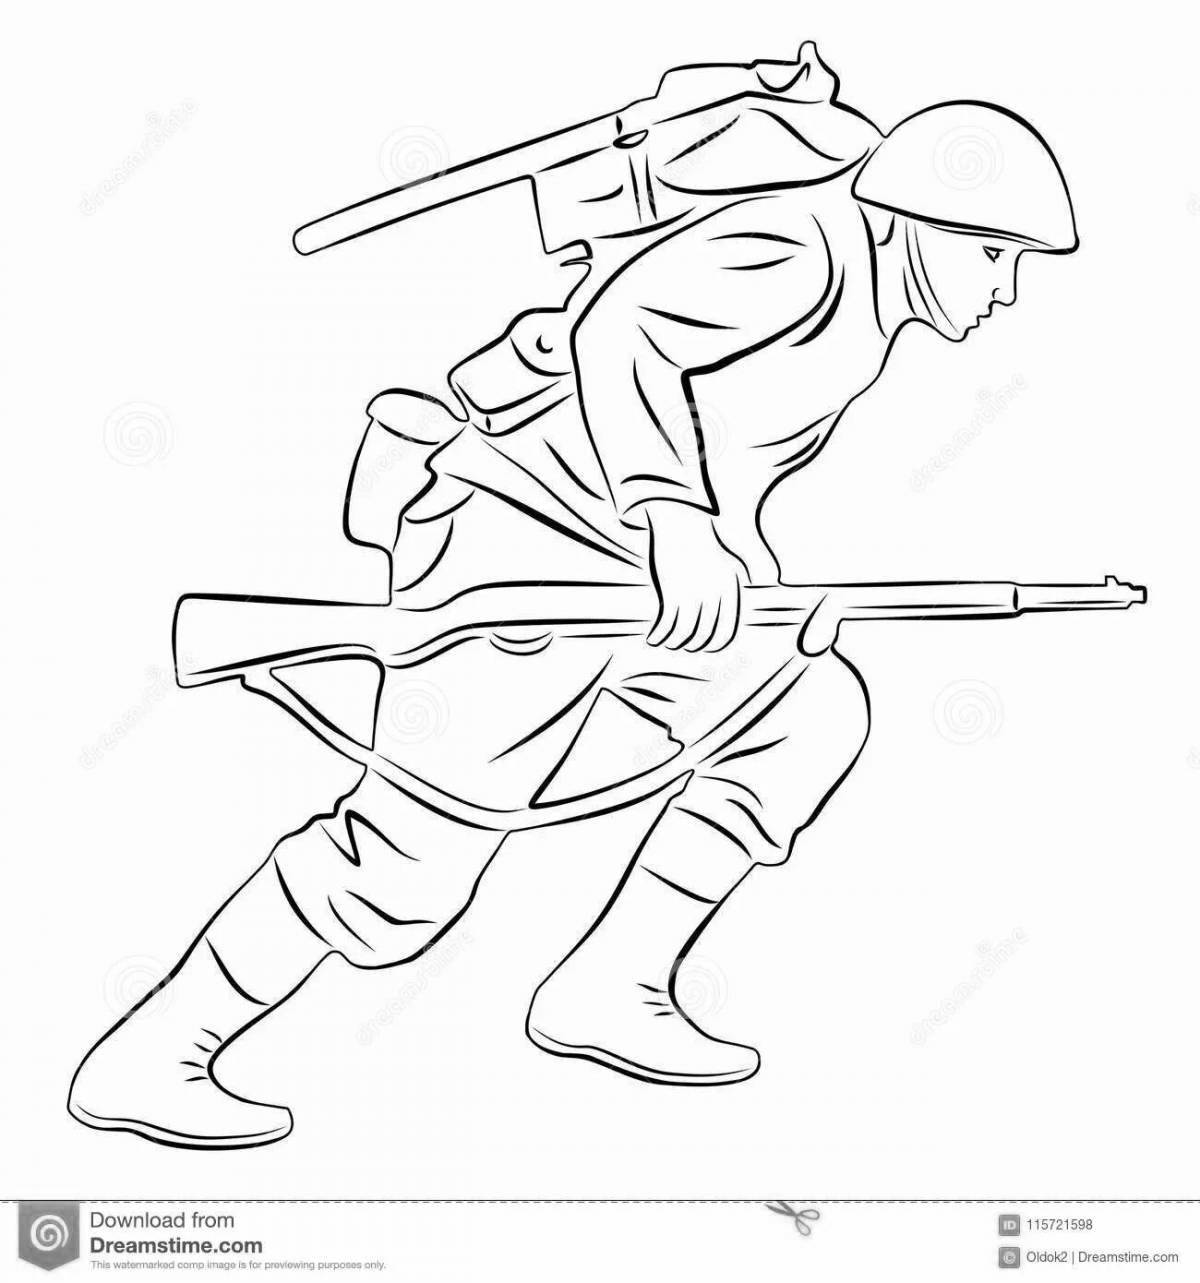 Playful wow soldier coloring page